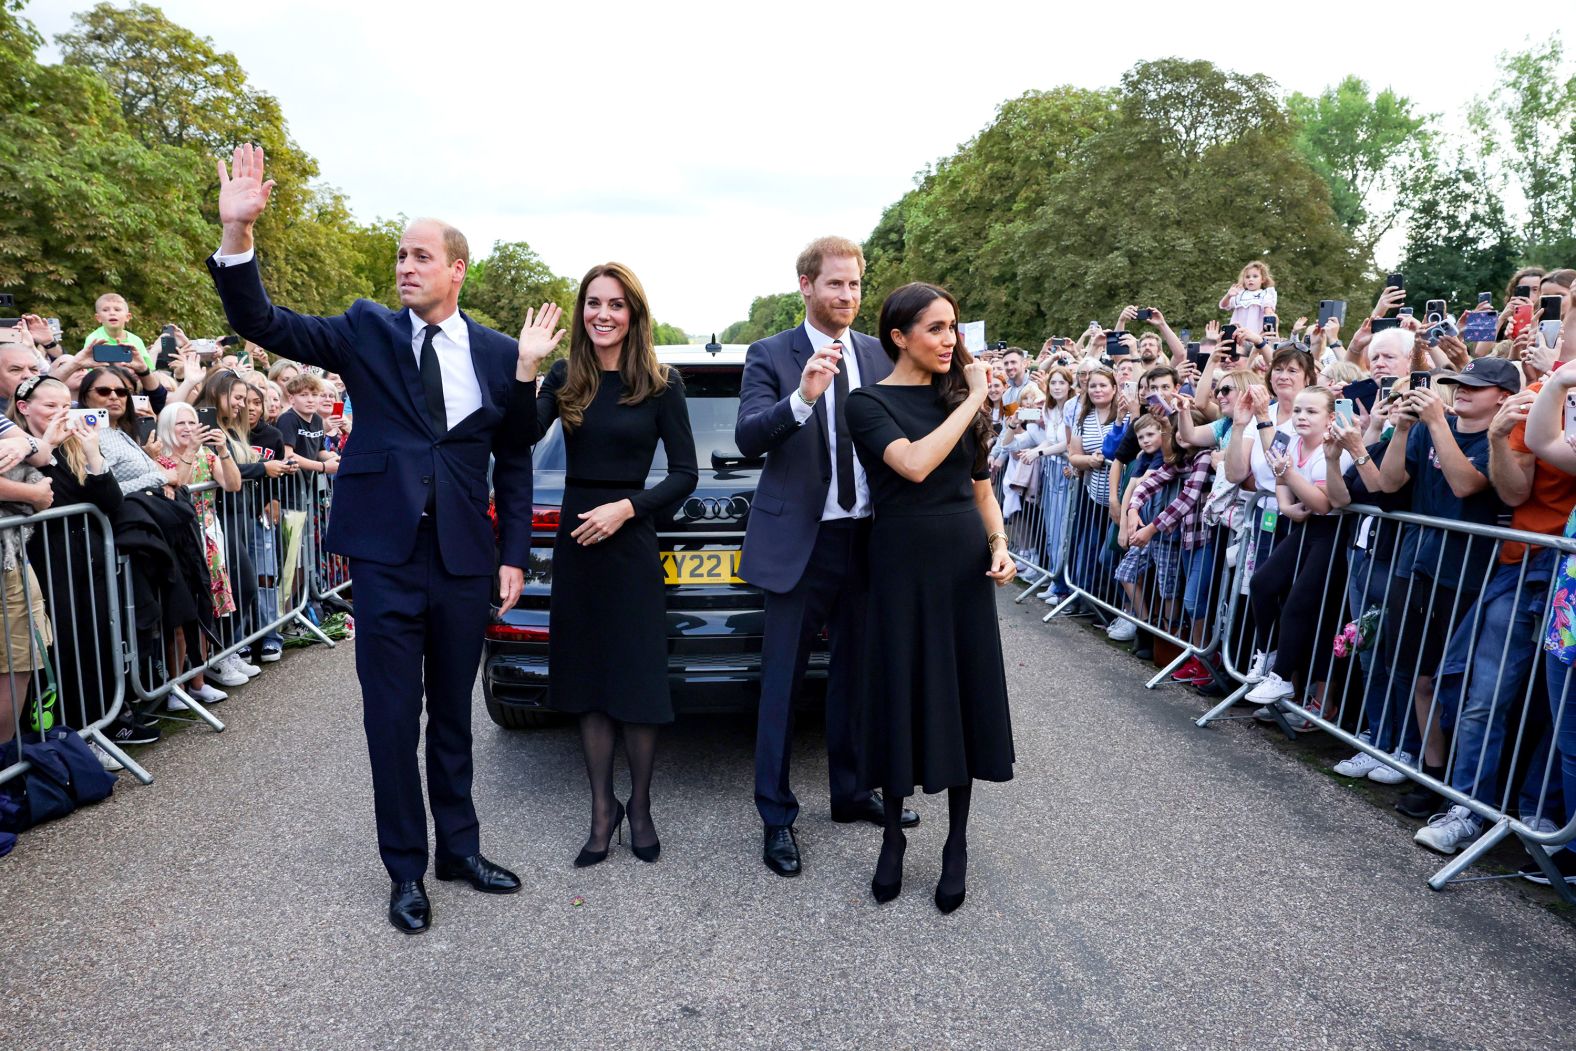 From left, Prince William, Kate, Prince Harry and Meghan, the Duchess of Sussex, wave to a crowd outside Windsor Castle ahead of the Queen's funeral in 2022.